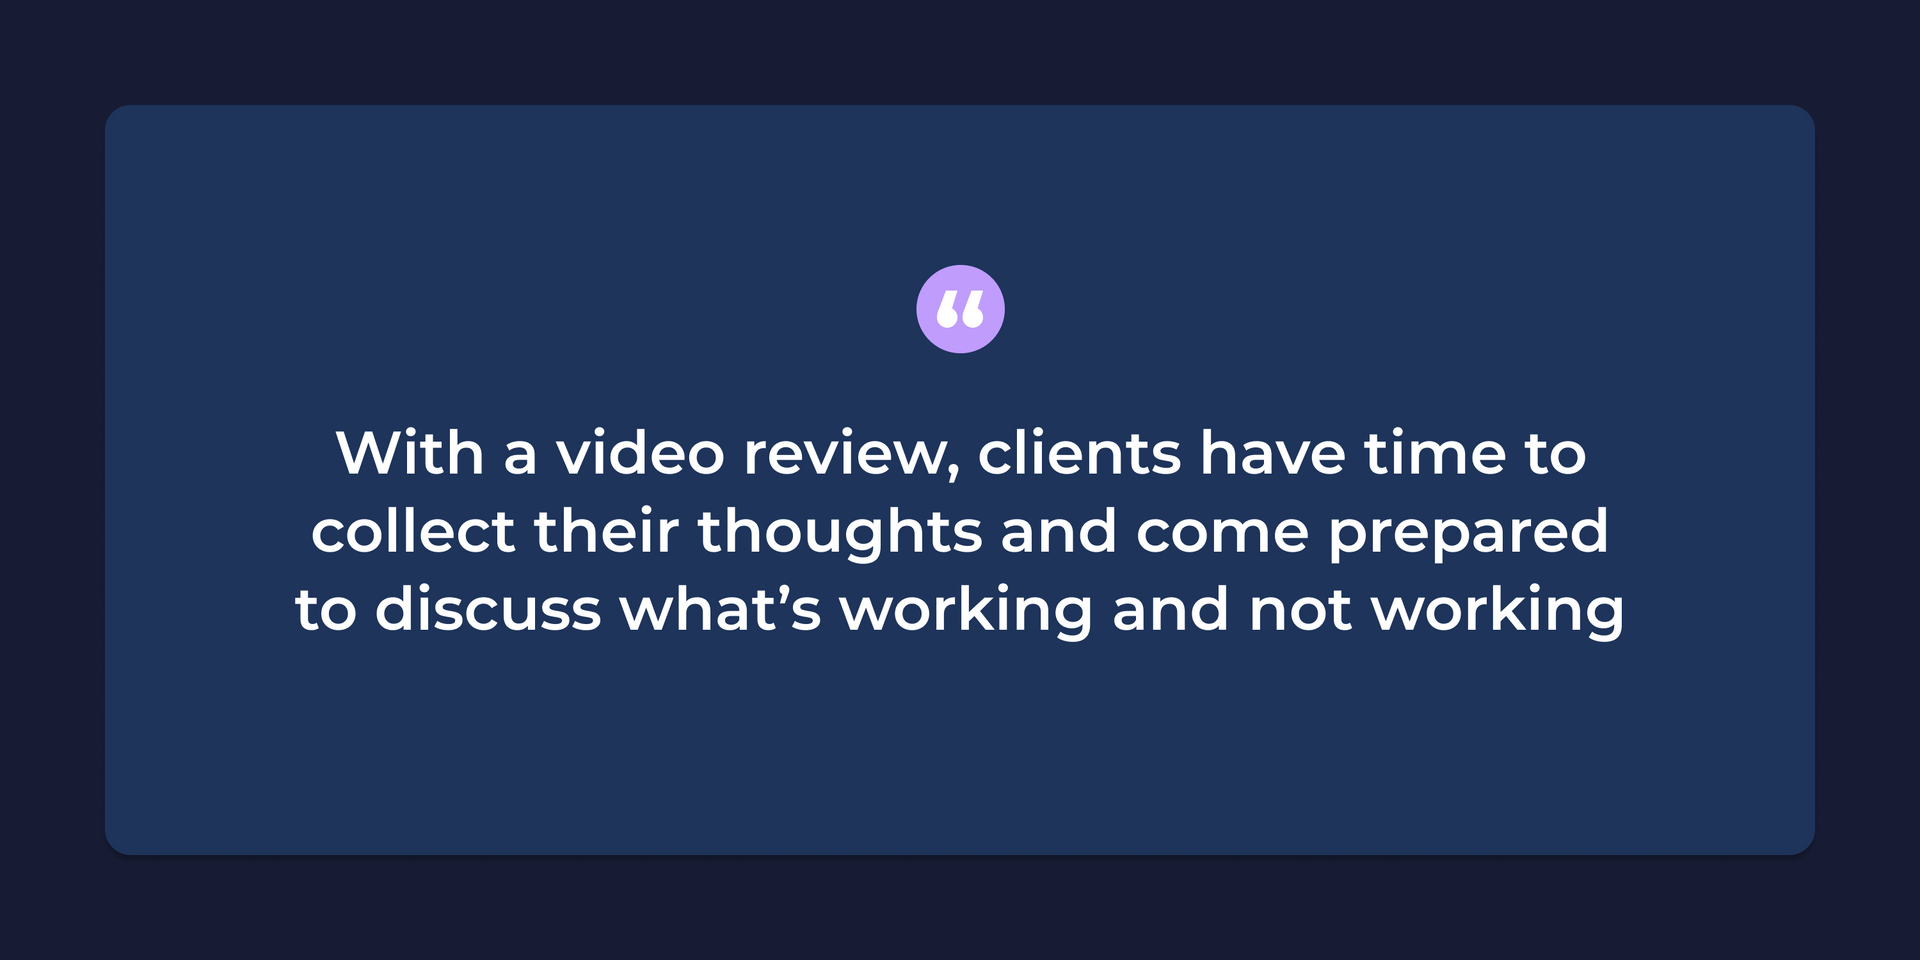 With a video review, clients have time to collect their thoughts and come prepared to discuss what’s working and not working